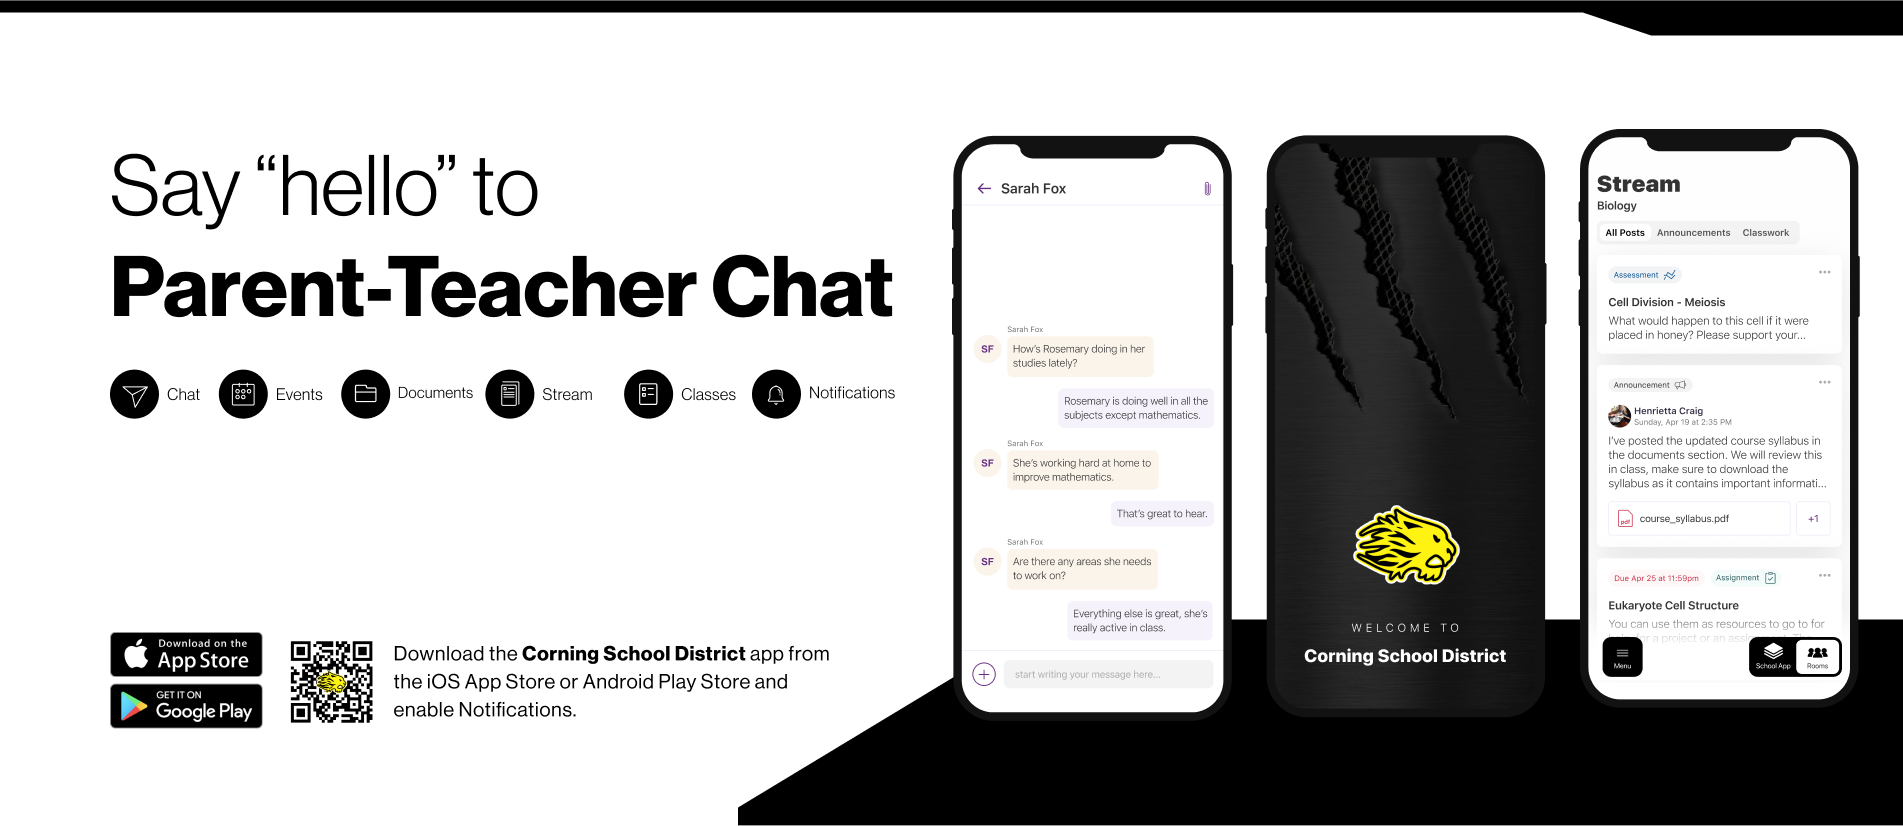 say "hello" to parent-teacher chat